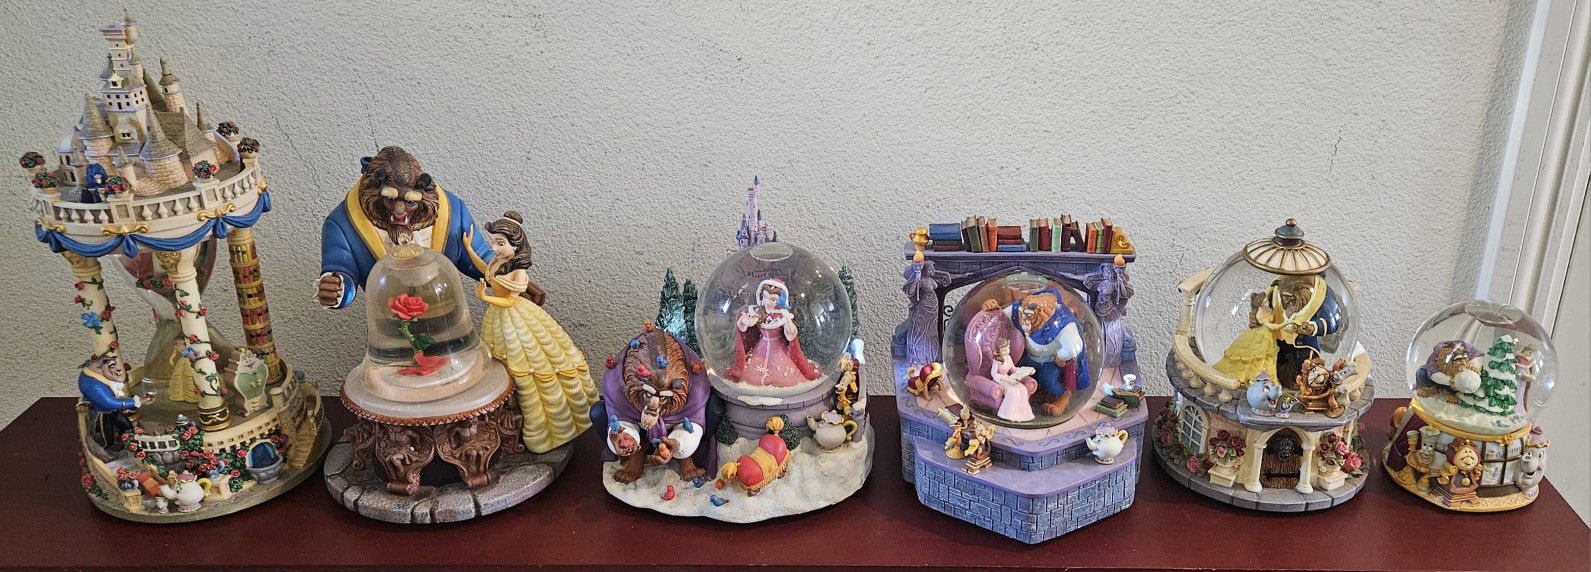 (6) Vintage Disney Beauty and the Beast Snowglobe Music Boxes